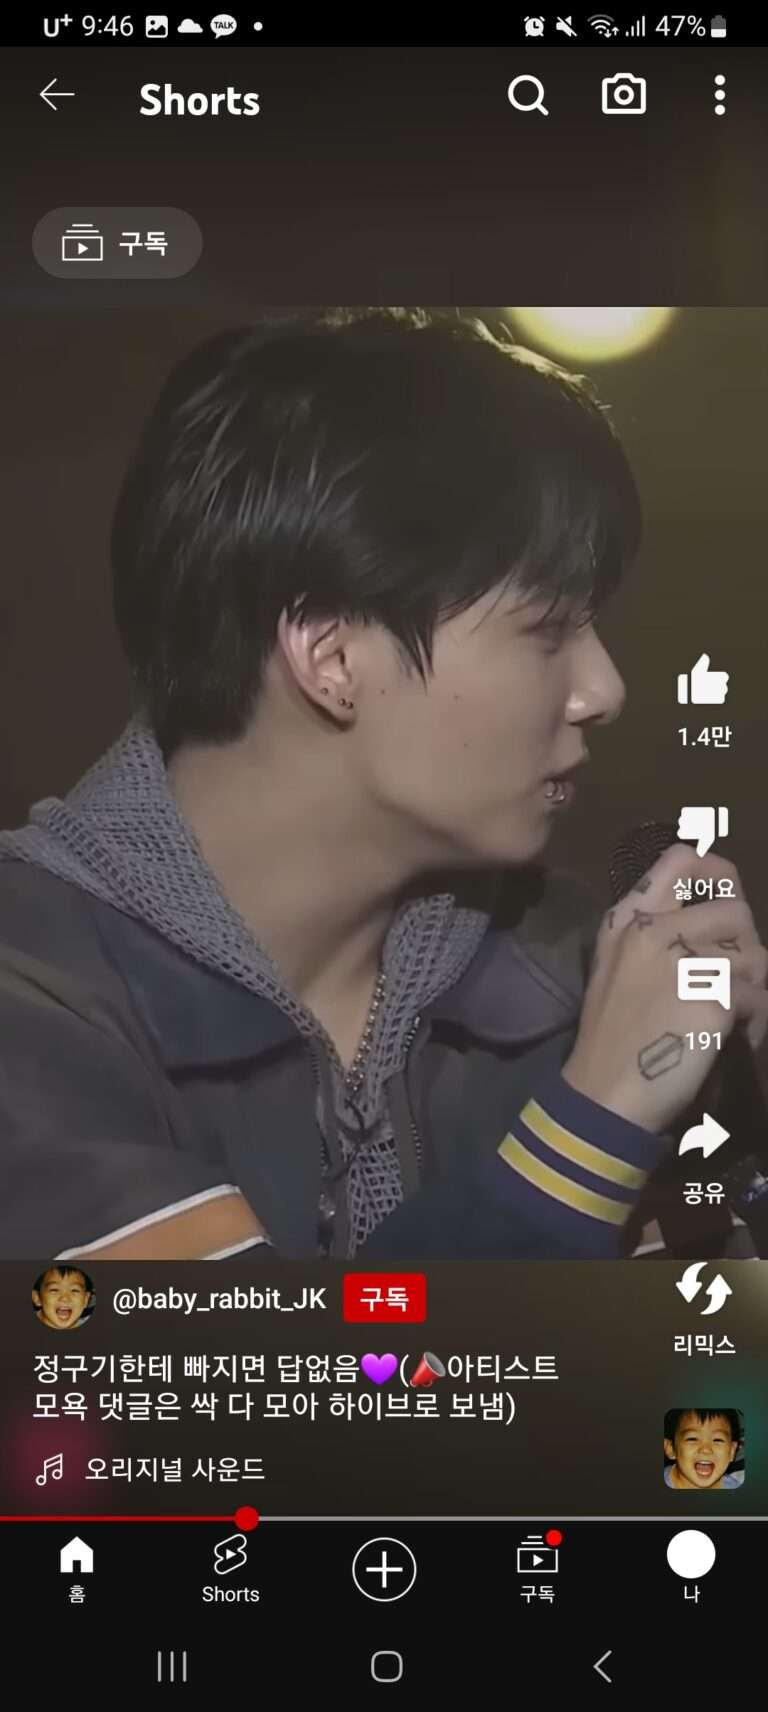 Netizens were surprised when they saw Jungkook's chin